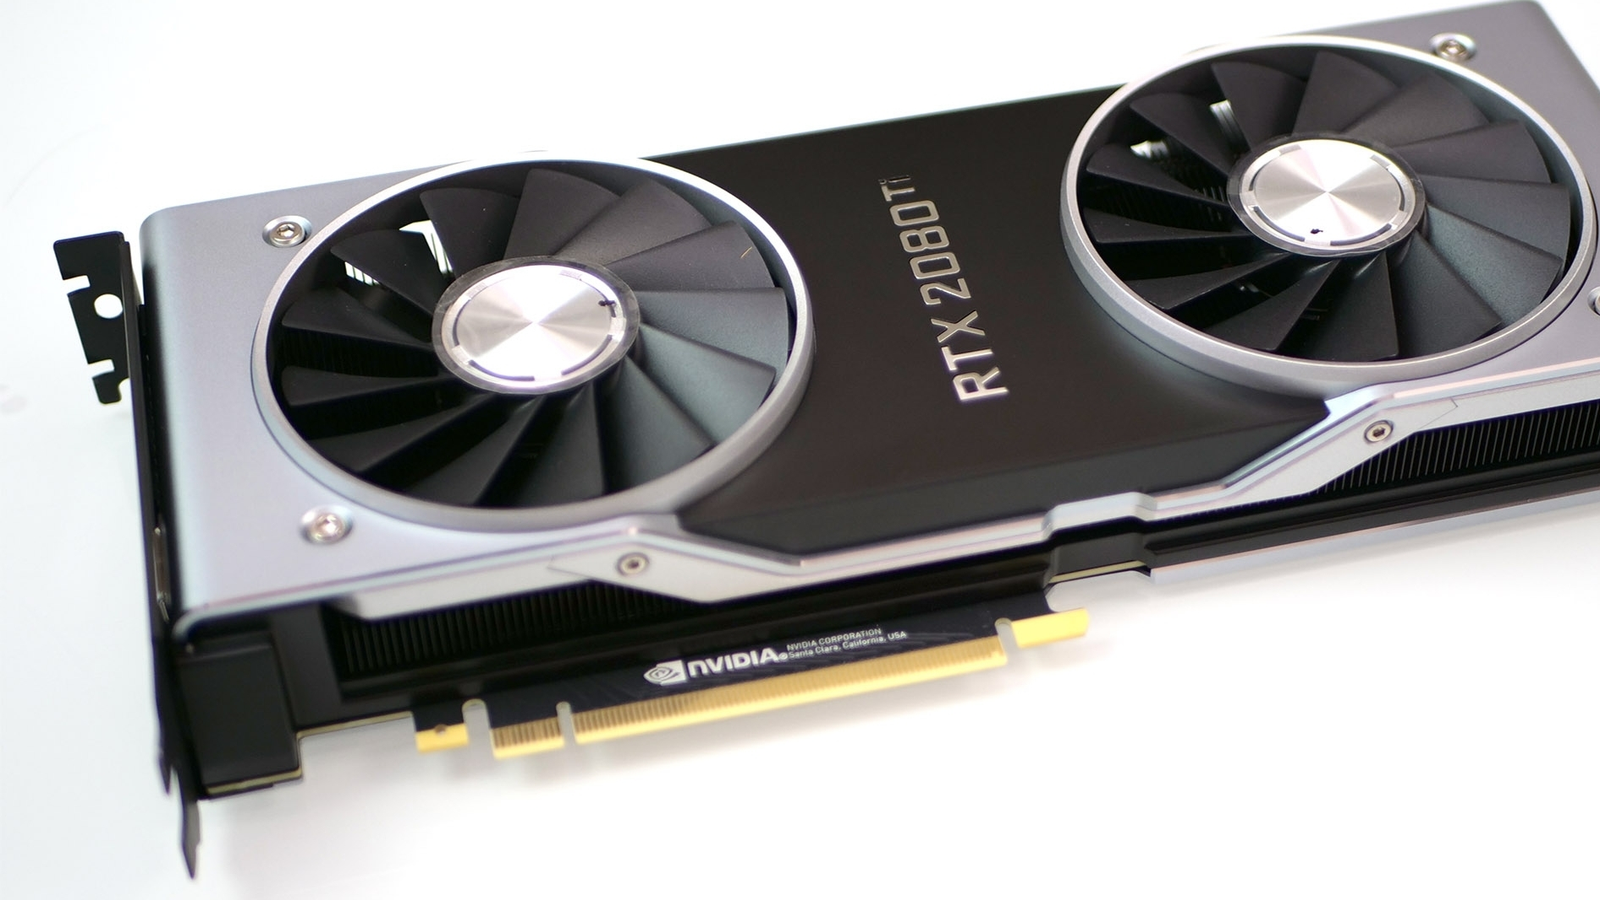 The best 1440p graphics cards 2023: top 1440p gaming GPUs